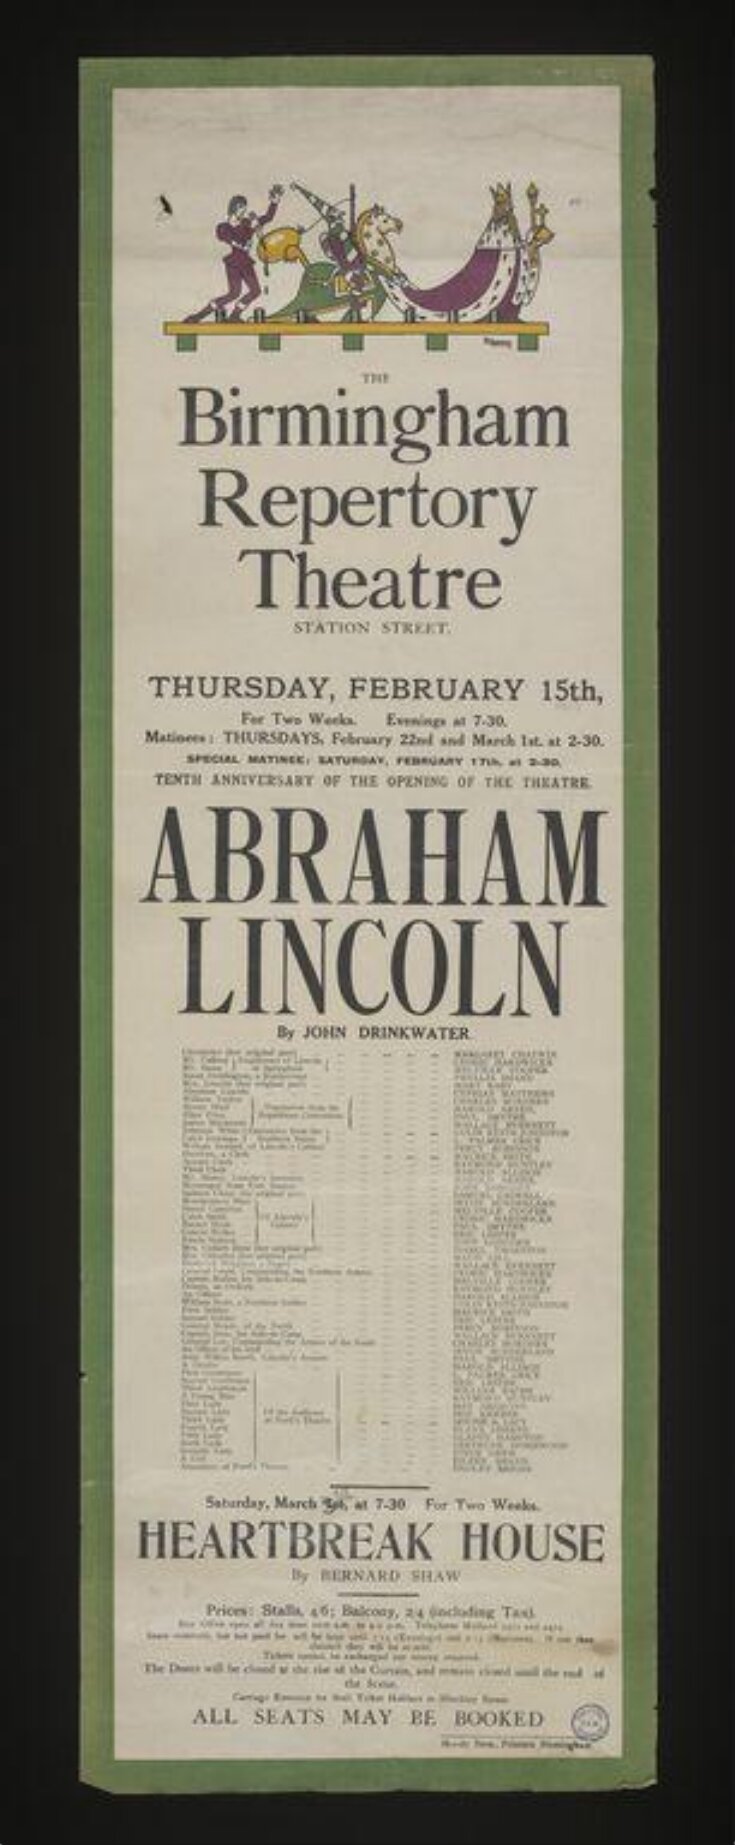 Repertory Theatre poster image